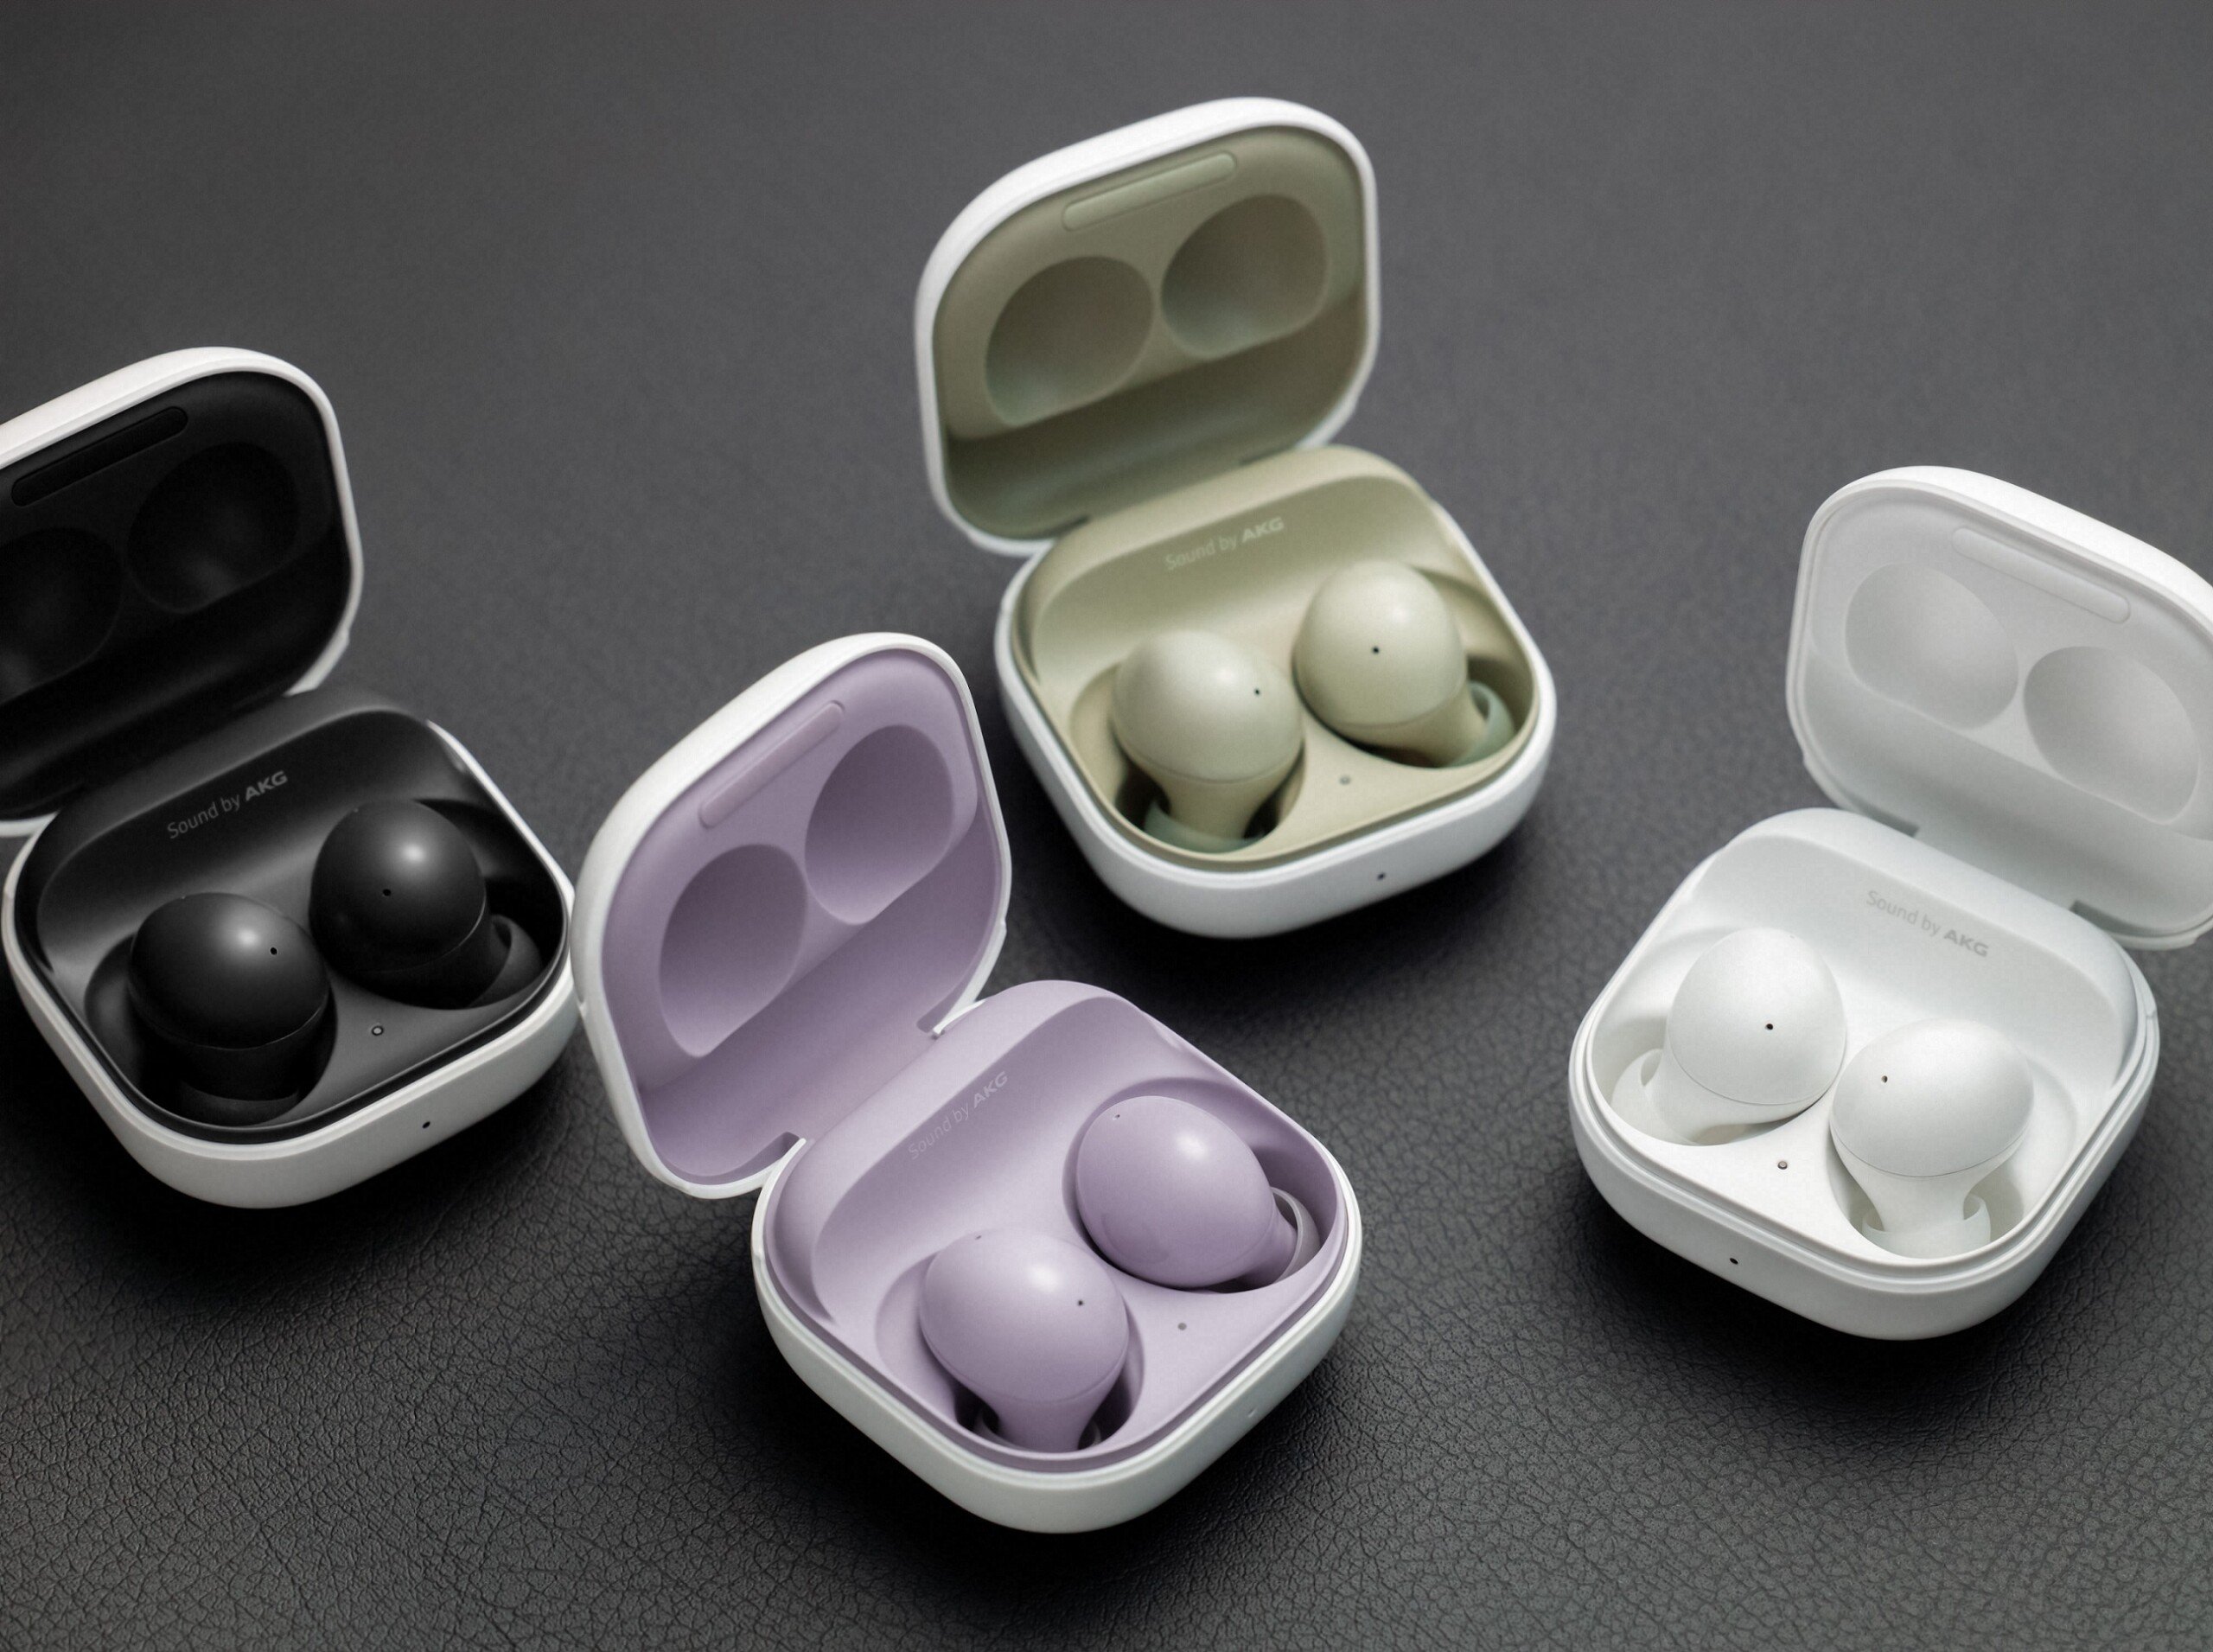 Samsung has improved the performance of TWS headphones Galaxy Buds 2 in a new software update